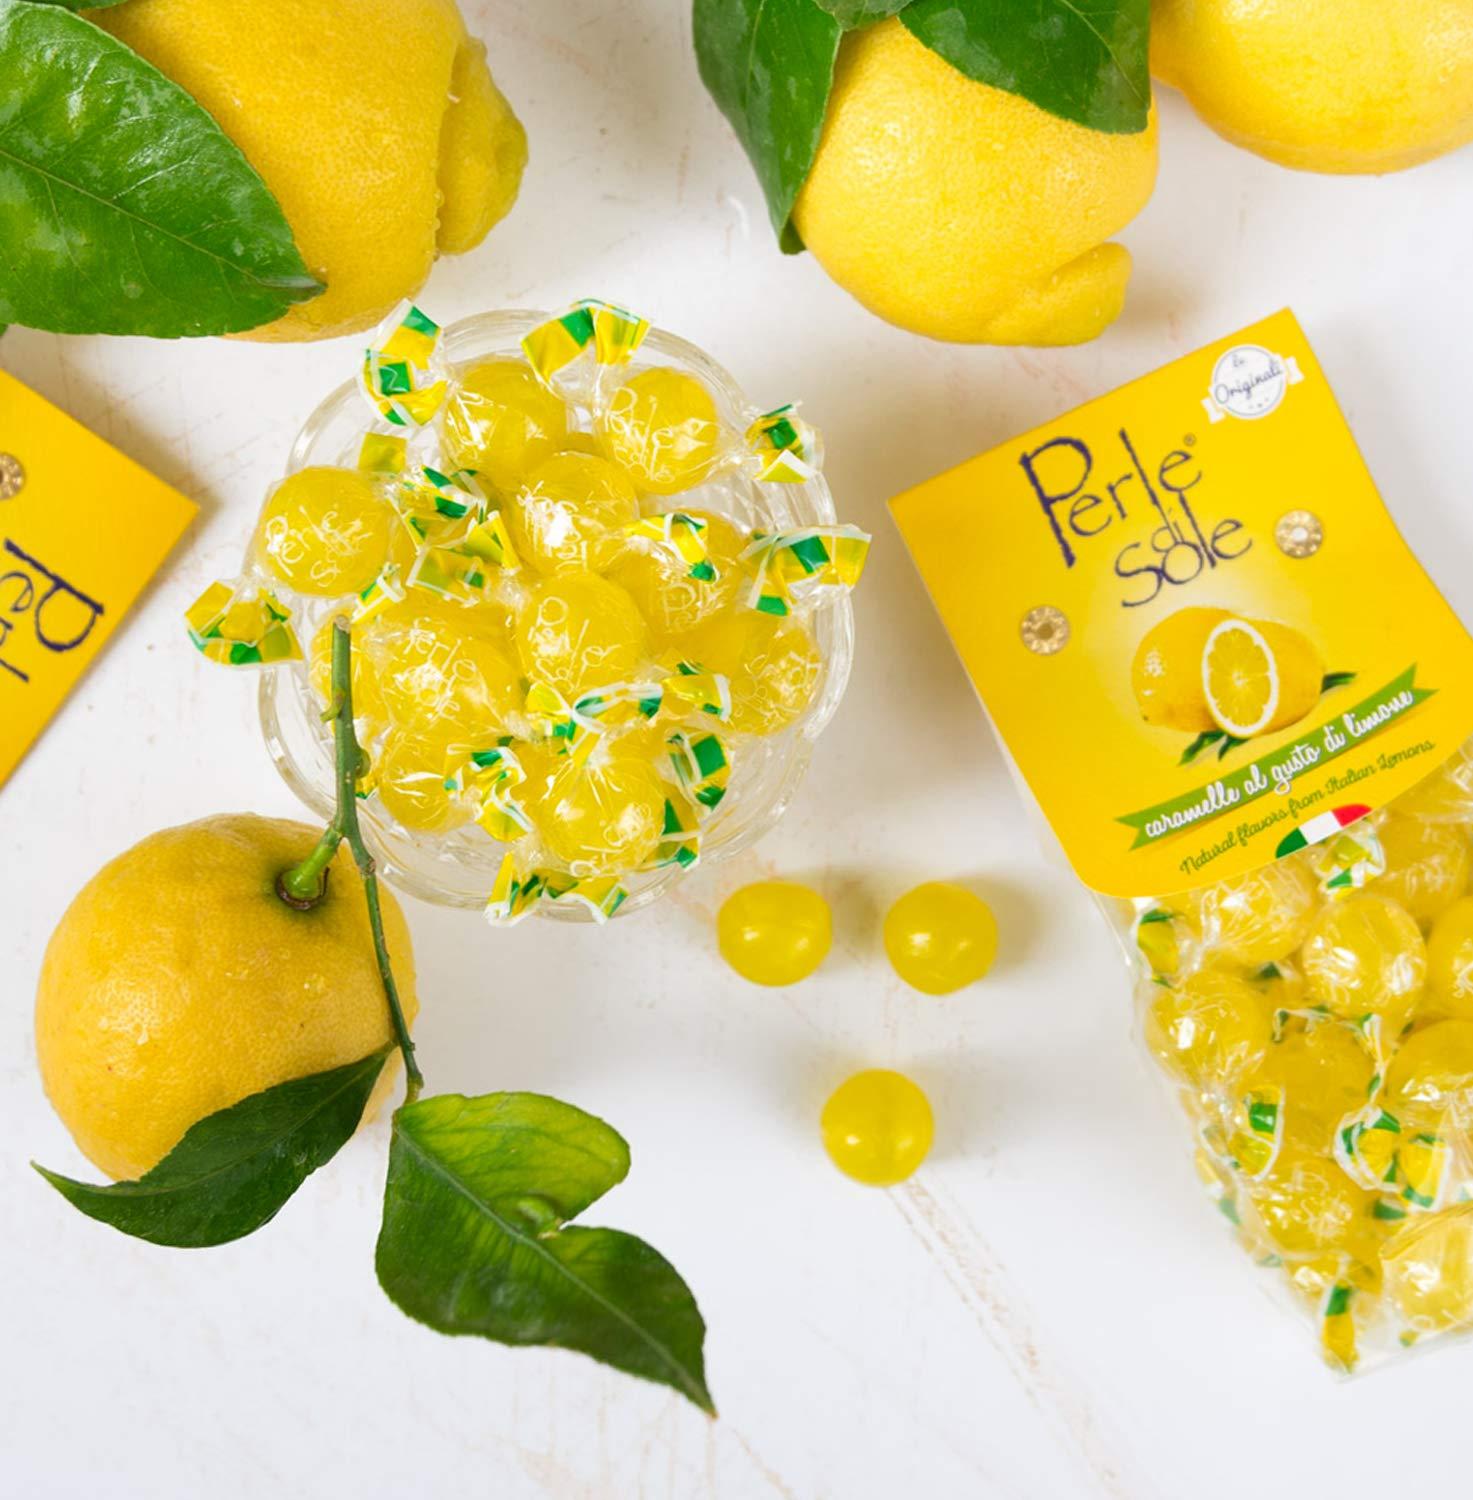 Perle di Sole Italian Lemon Drops Hard Candy Individually Wrapped (7.05 oz)  Made with Essential Oils of Lemons from the Amalfi Coast - Italian Gifts